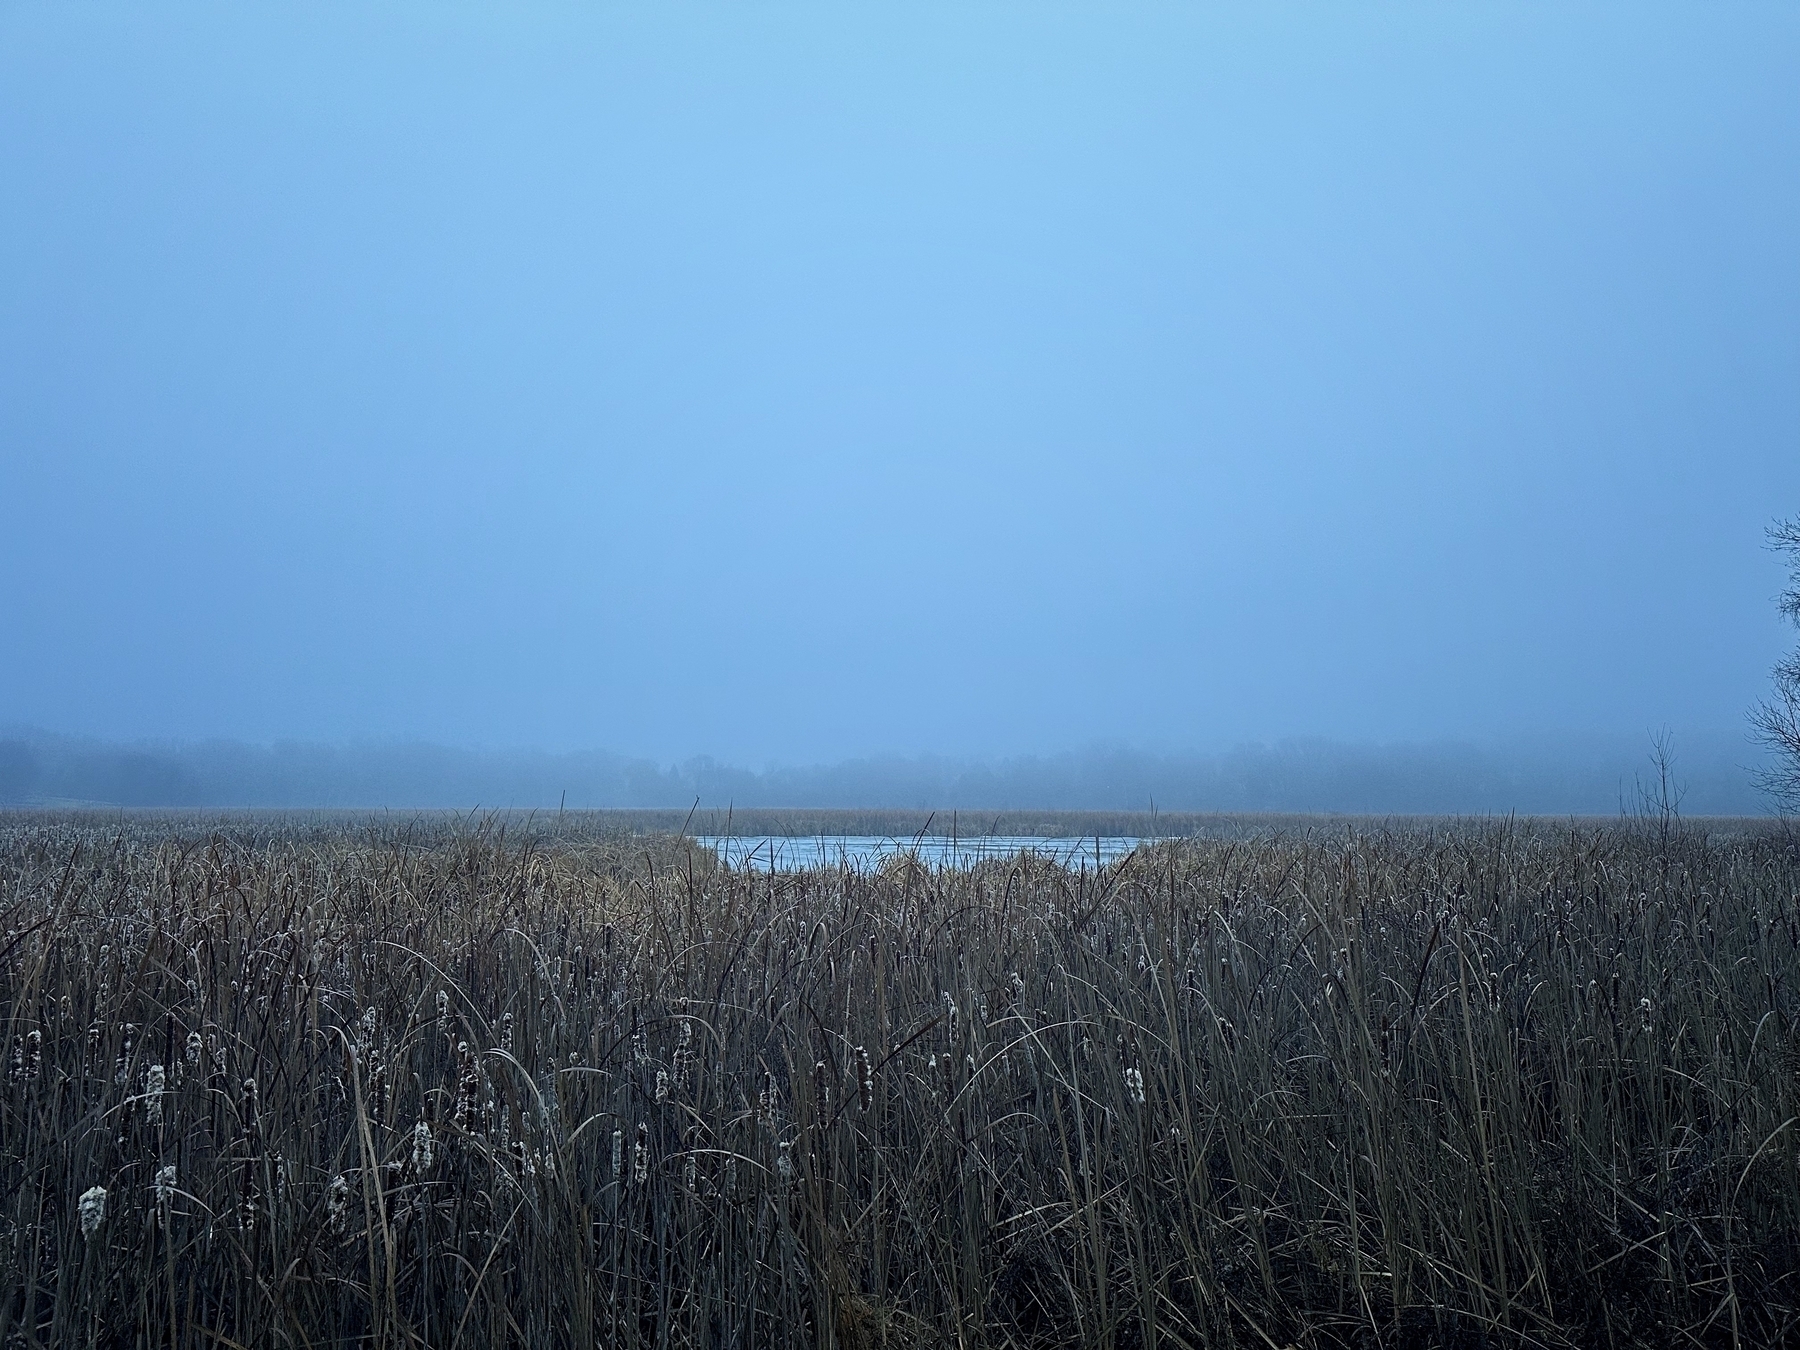 Tall, dense reeds in the foreground give way to a calm body of water under a heavy, overcast sky.